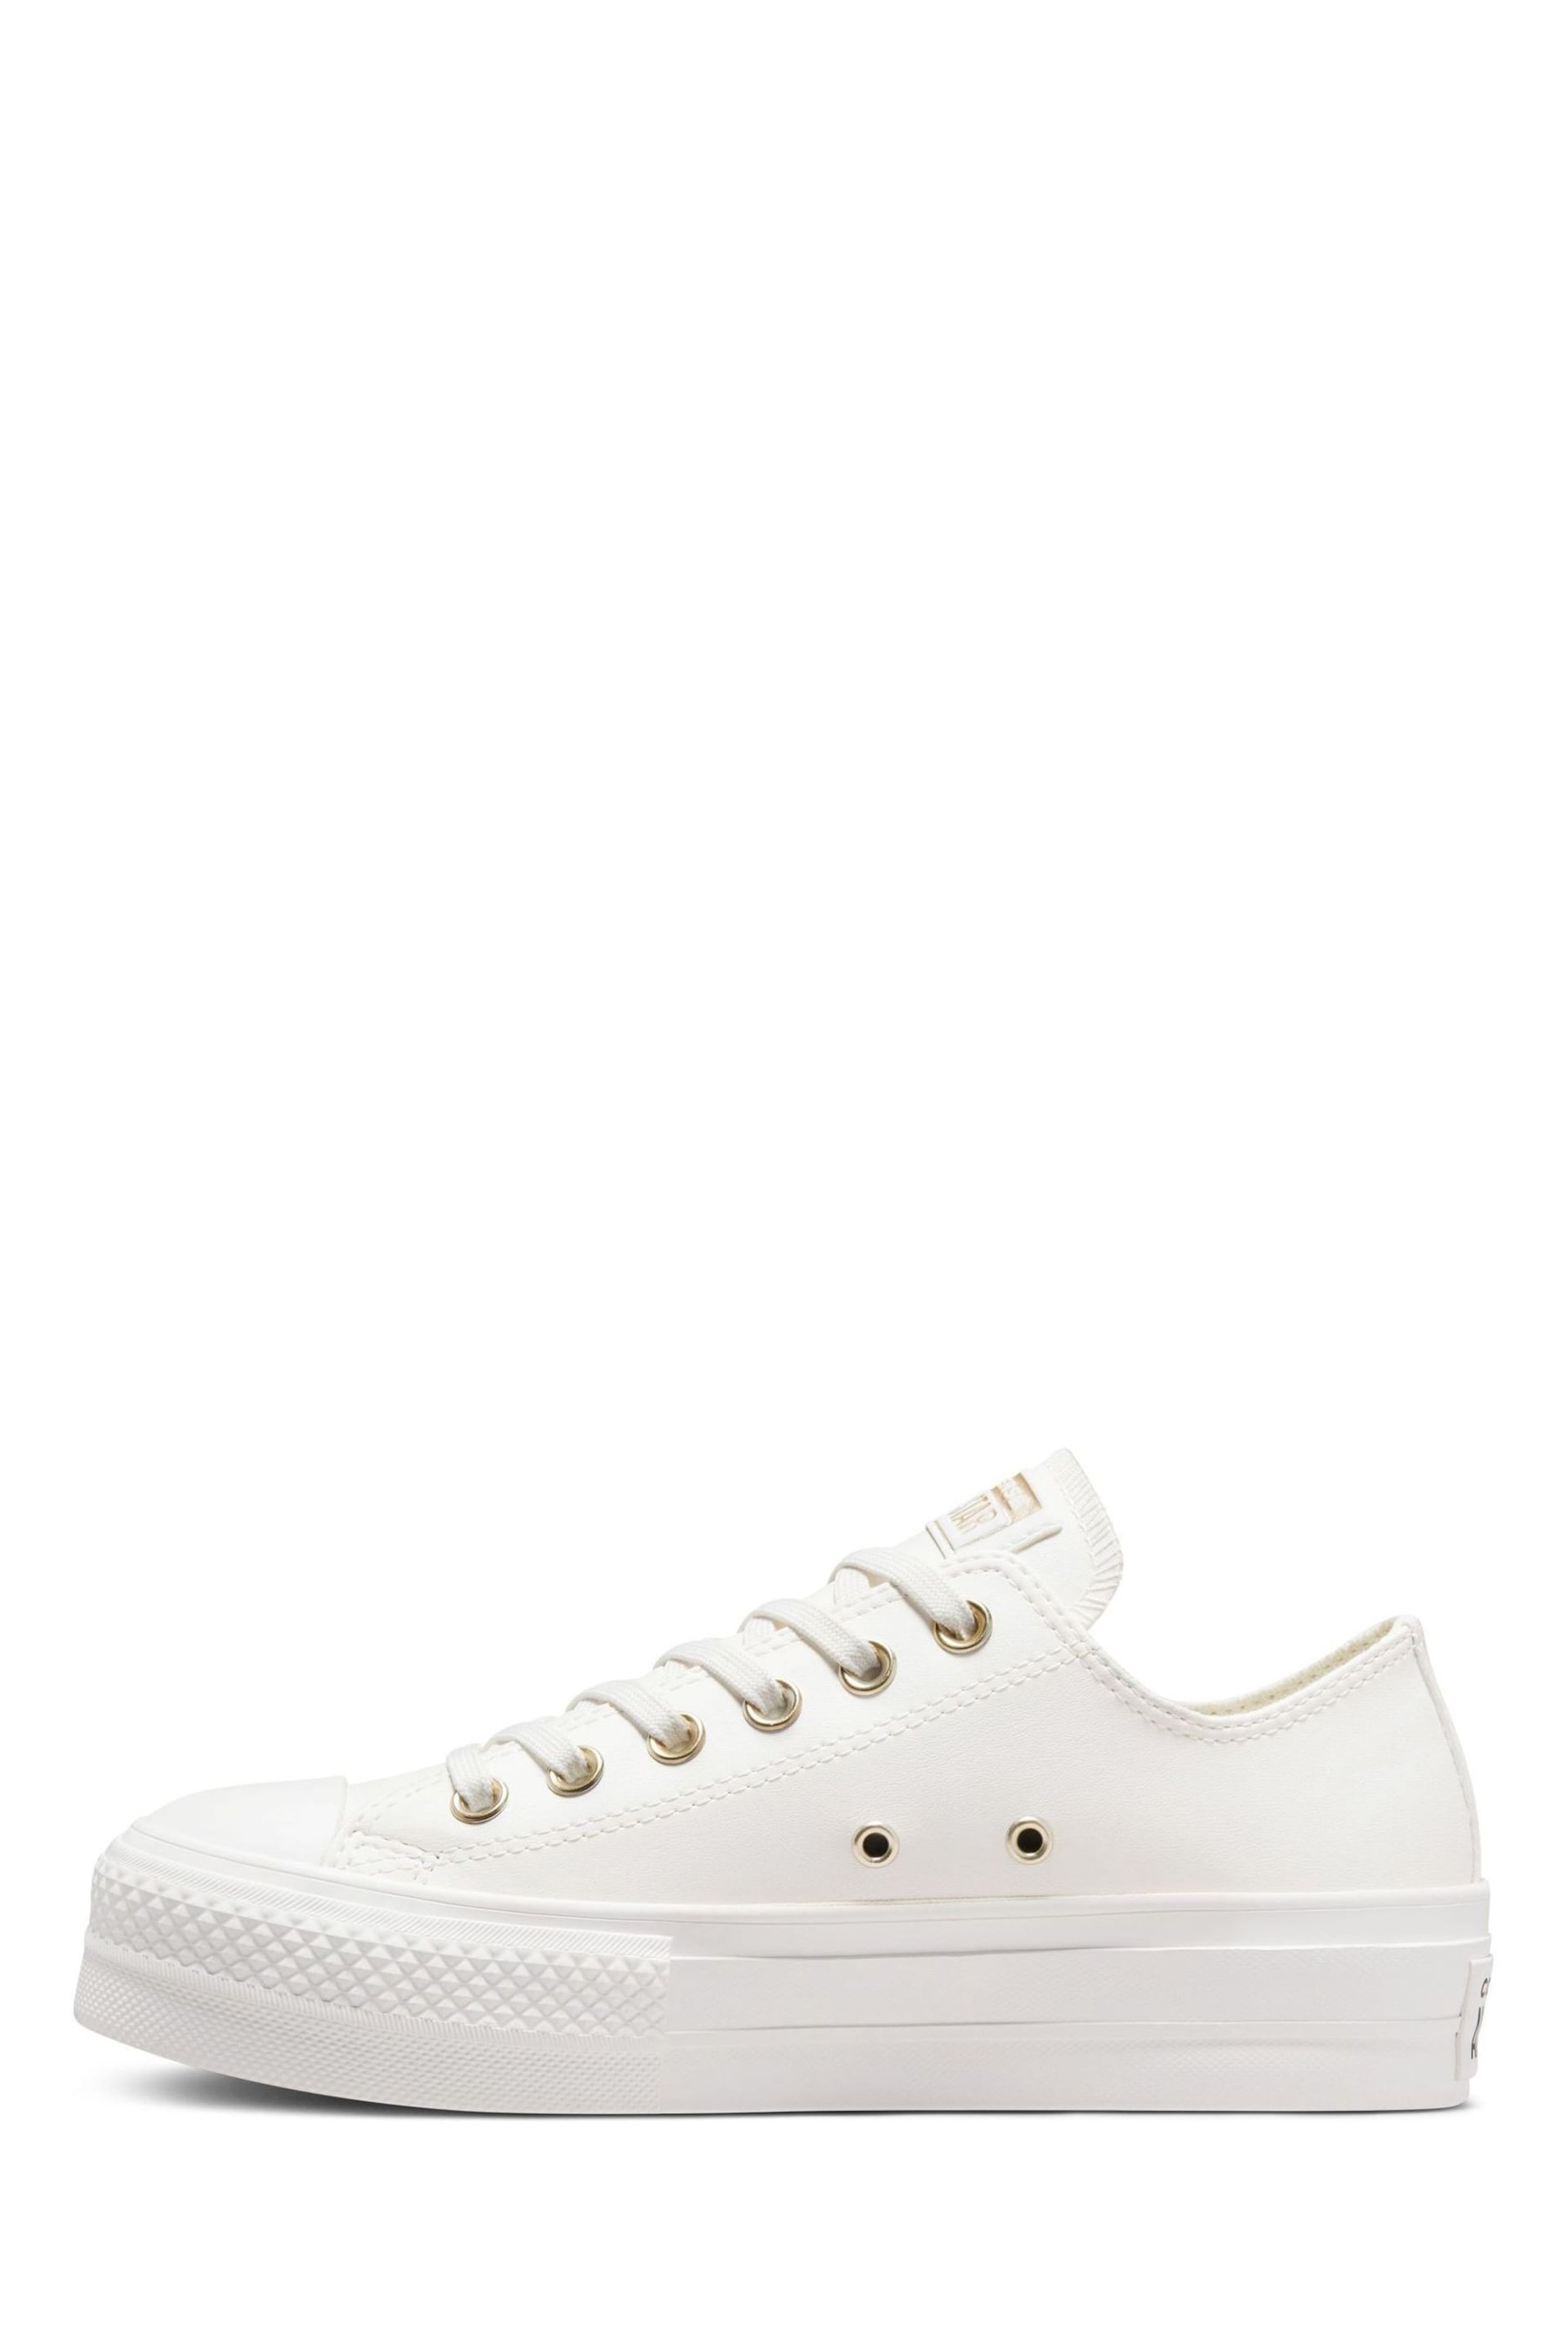 Converse White Lift Platform Low Top Trainers - Image 2 of 7